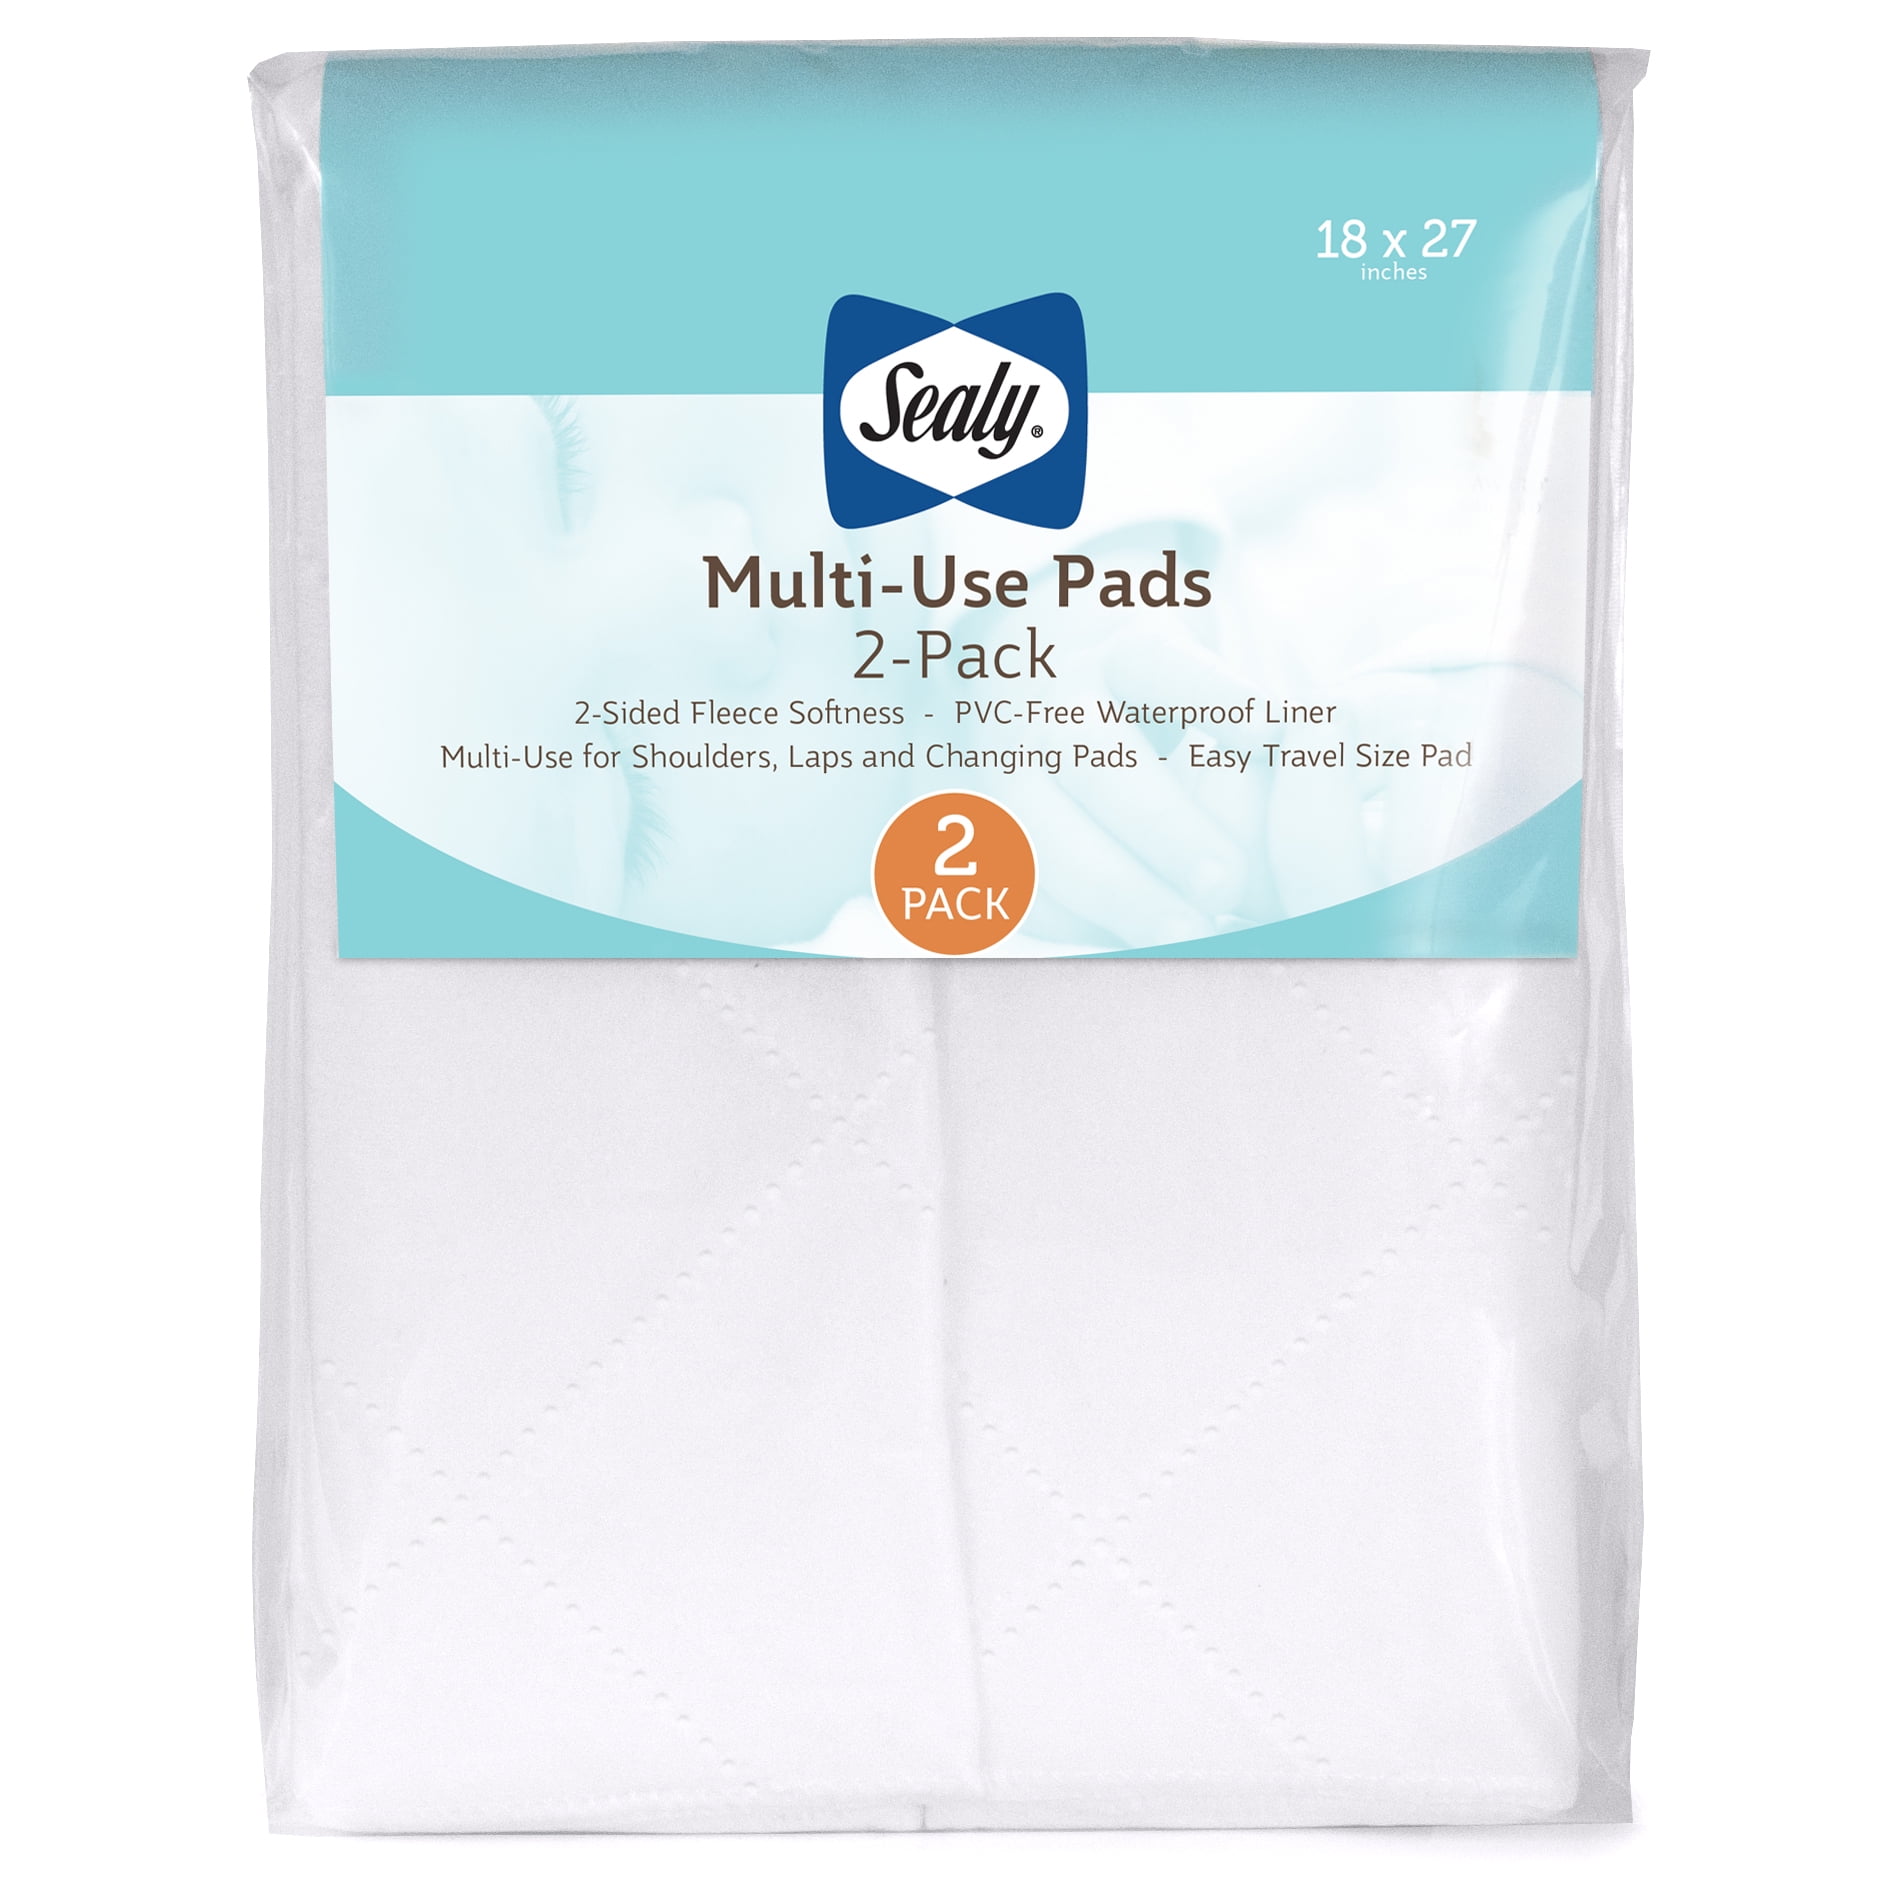 Sealy Waterproof Multi-Use Liner Pads for Baby (2 Count), 18 x 27, Crib